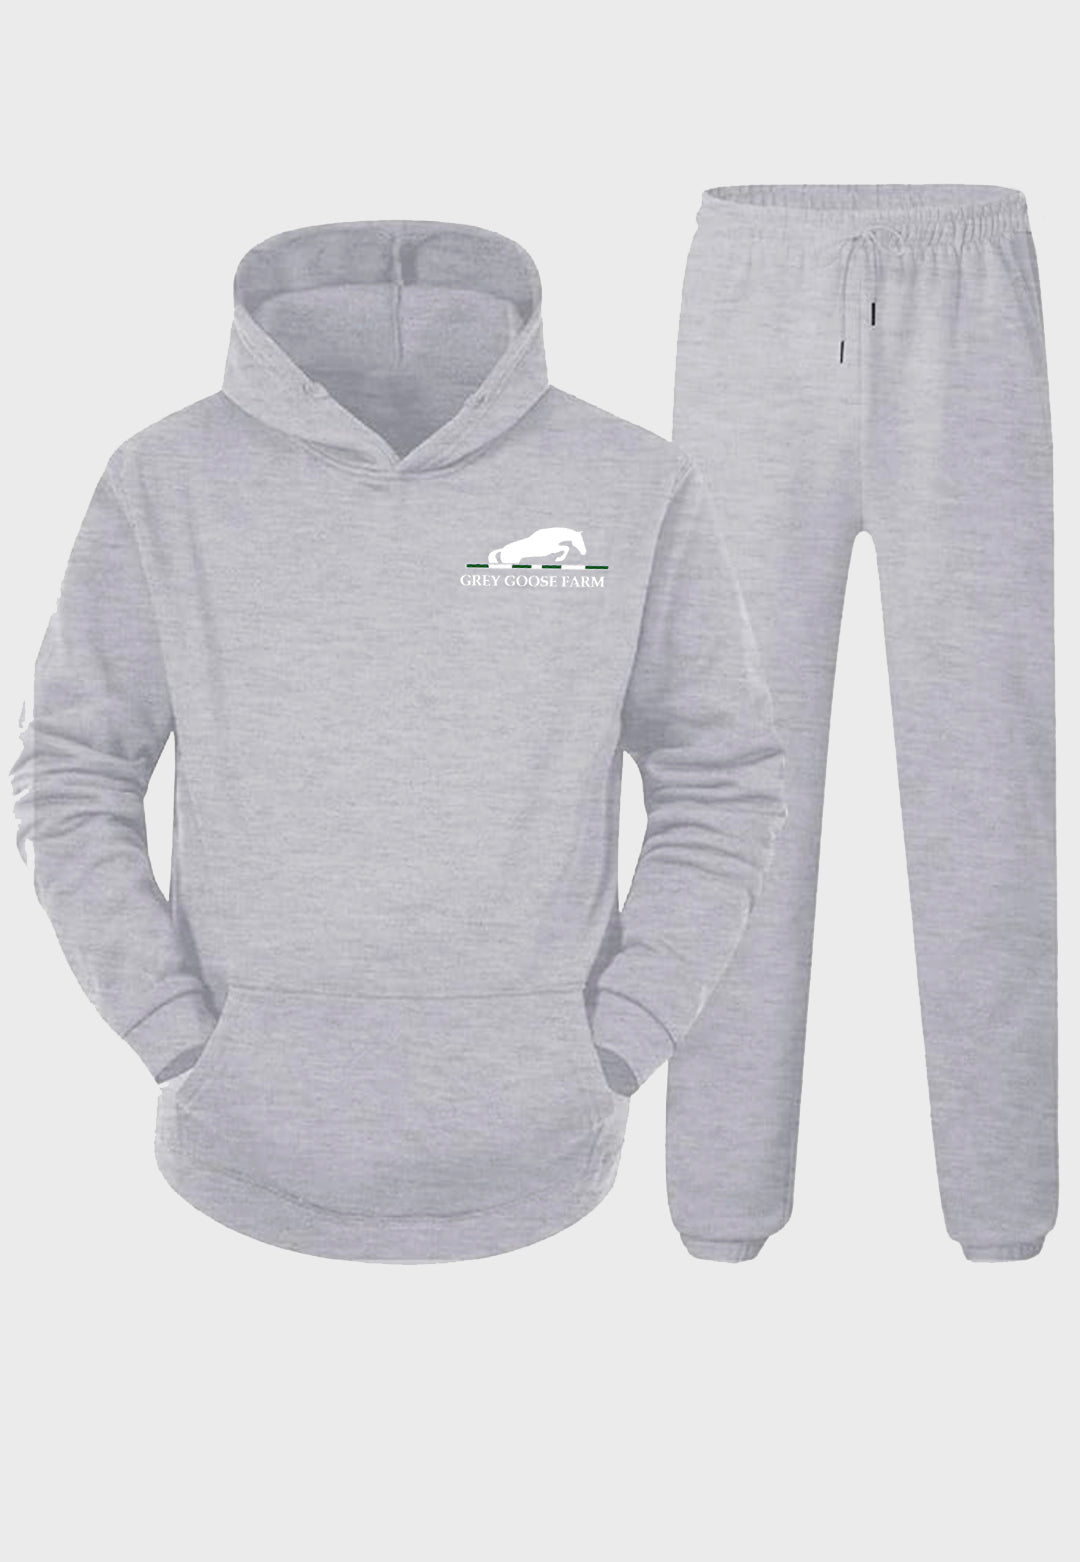 Grey Goose Farm Unisex oversized sweatsuit set with long sleeve hoodie and joggers